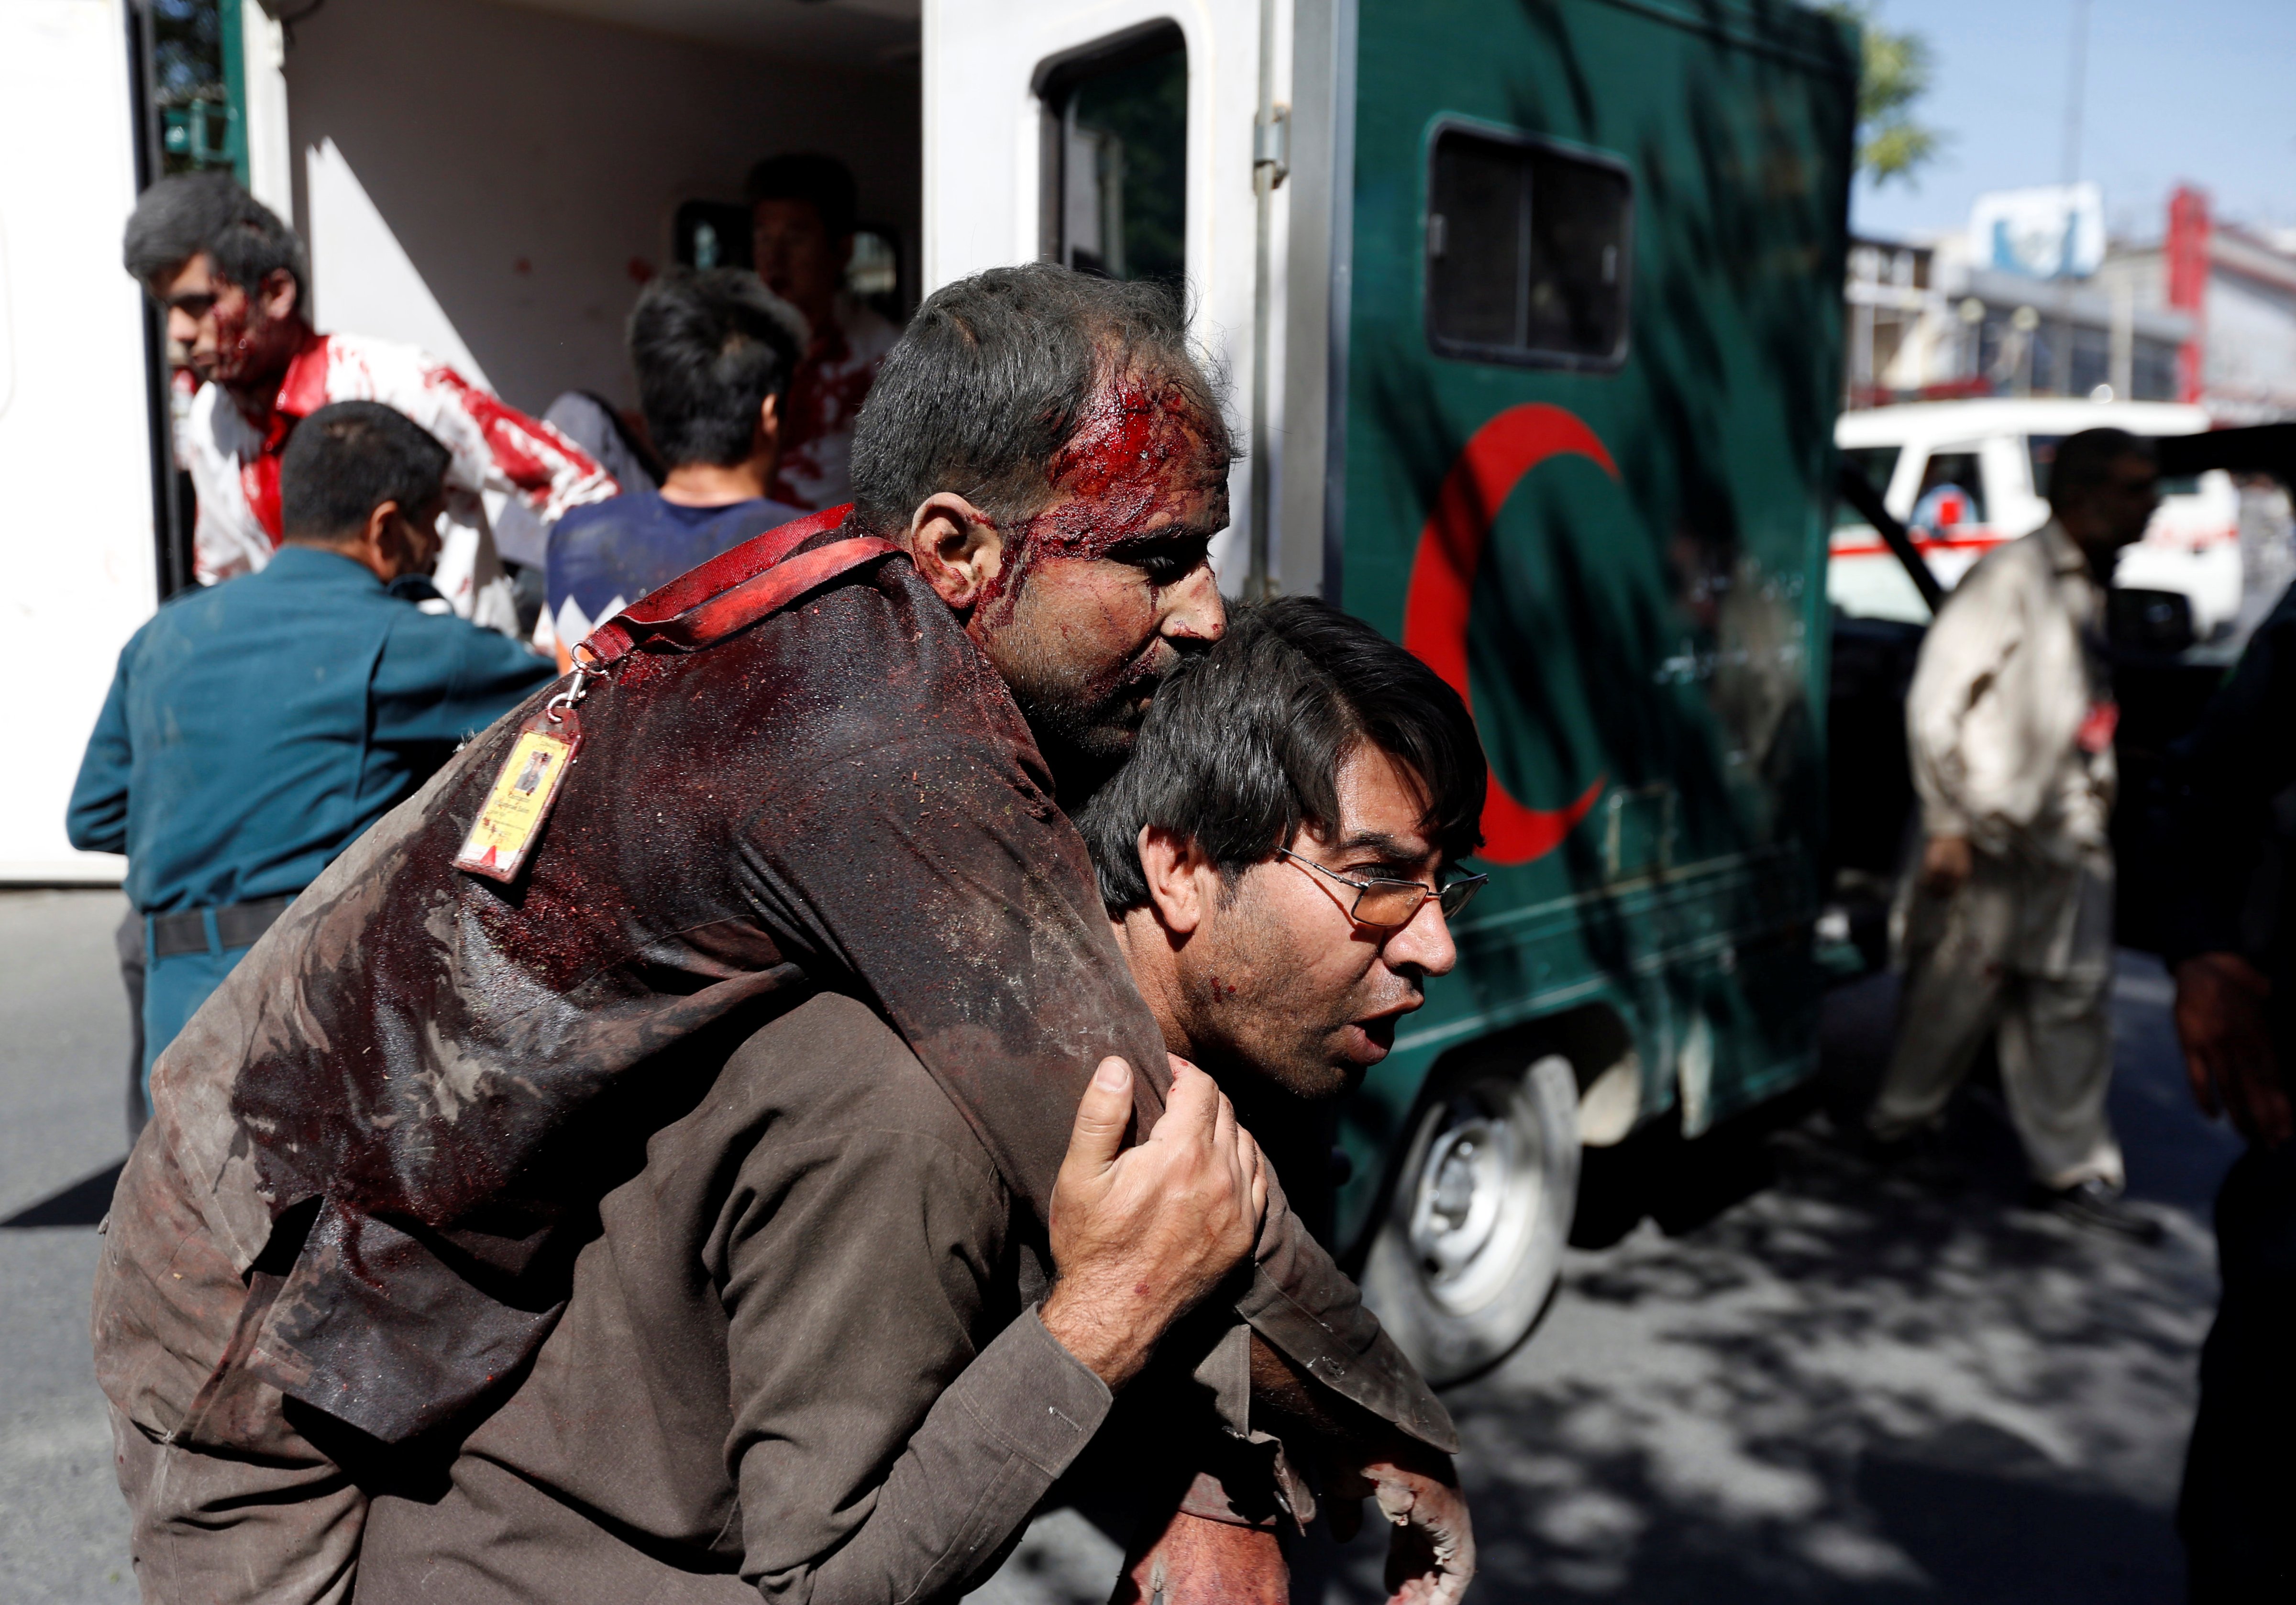 An Afghan man carries an injured man to a hospital after a blast in Kabul, May 31, 2017. (Mohammad Ismail—Reuters)